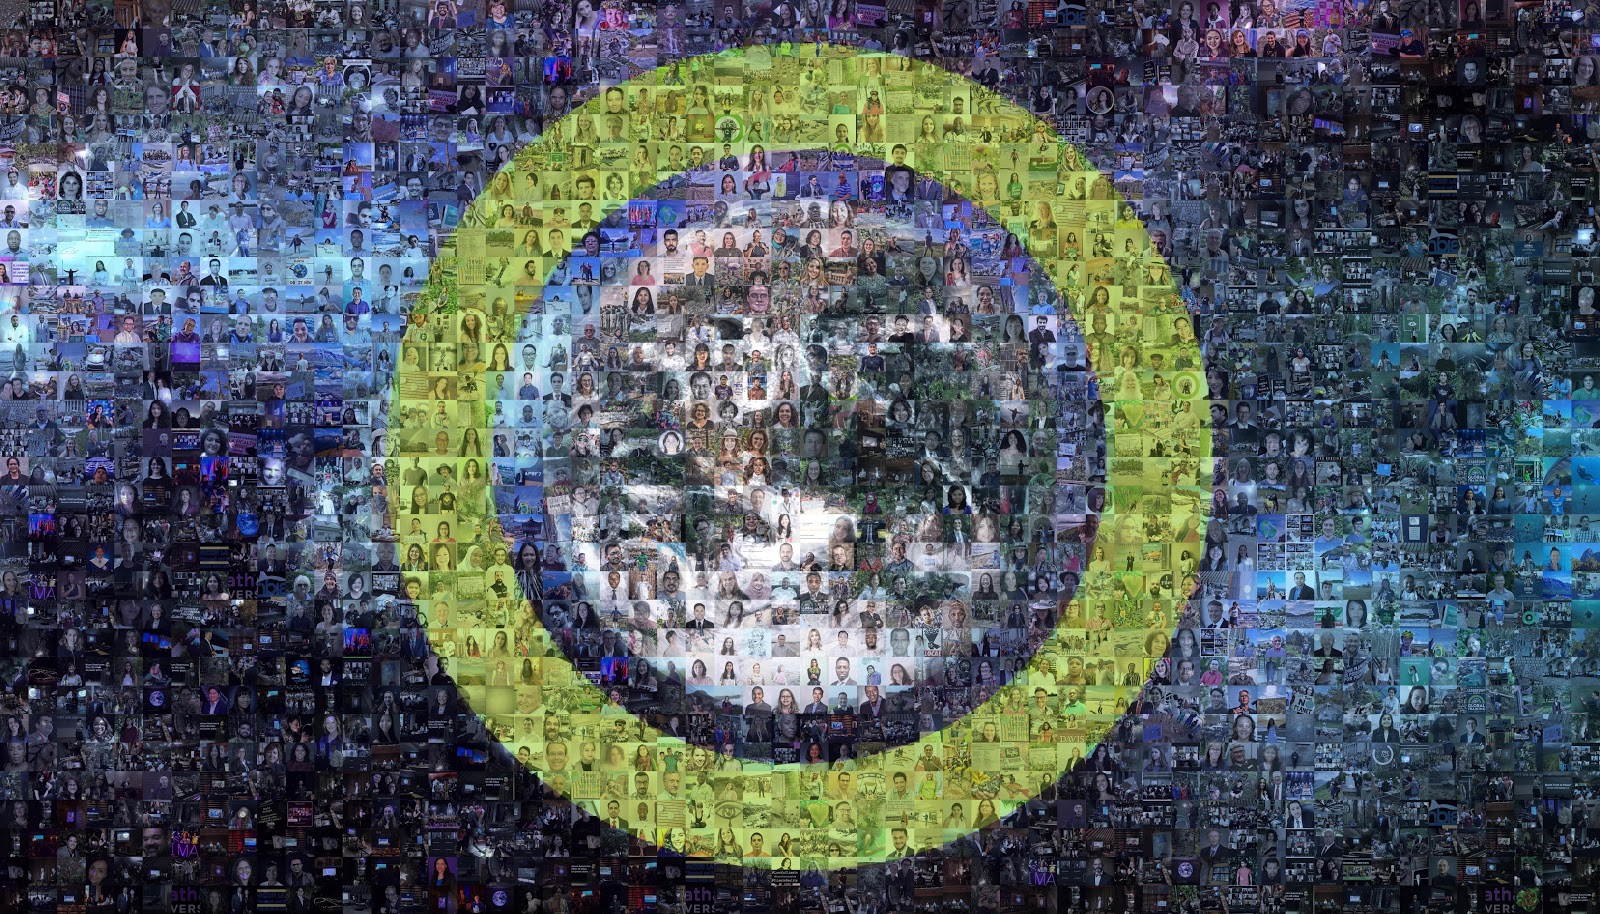 Image of art created by placing photos of virtual event attendees into a mosaic pattern.